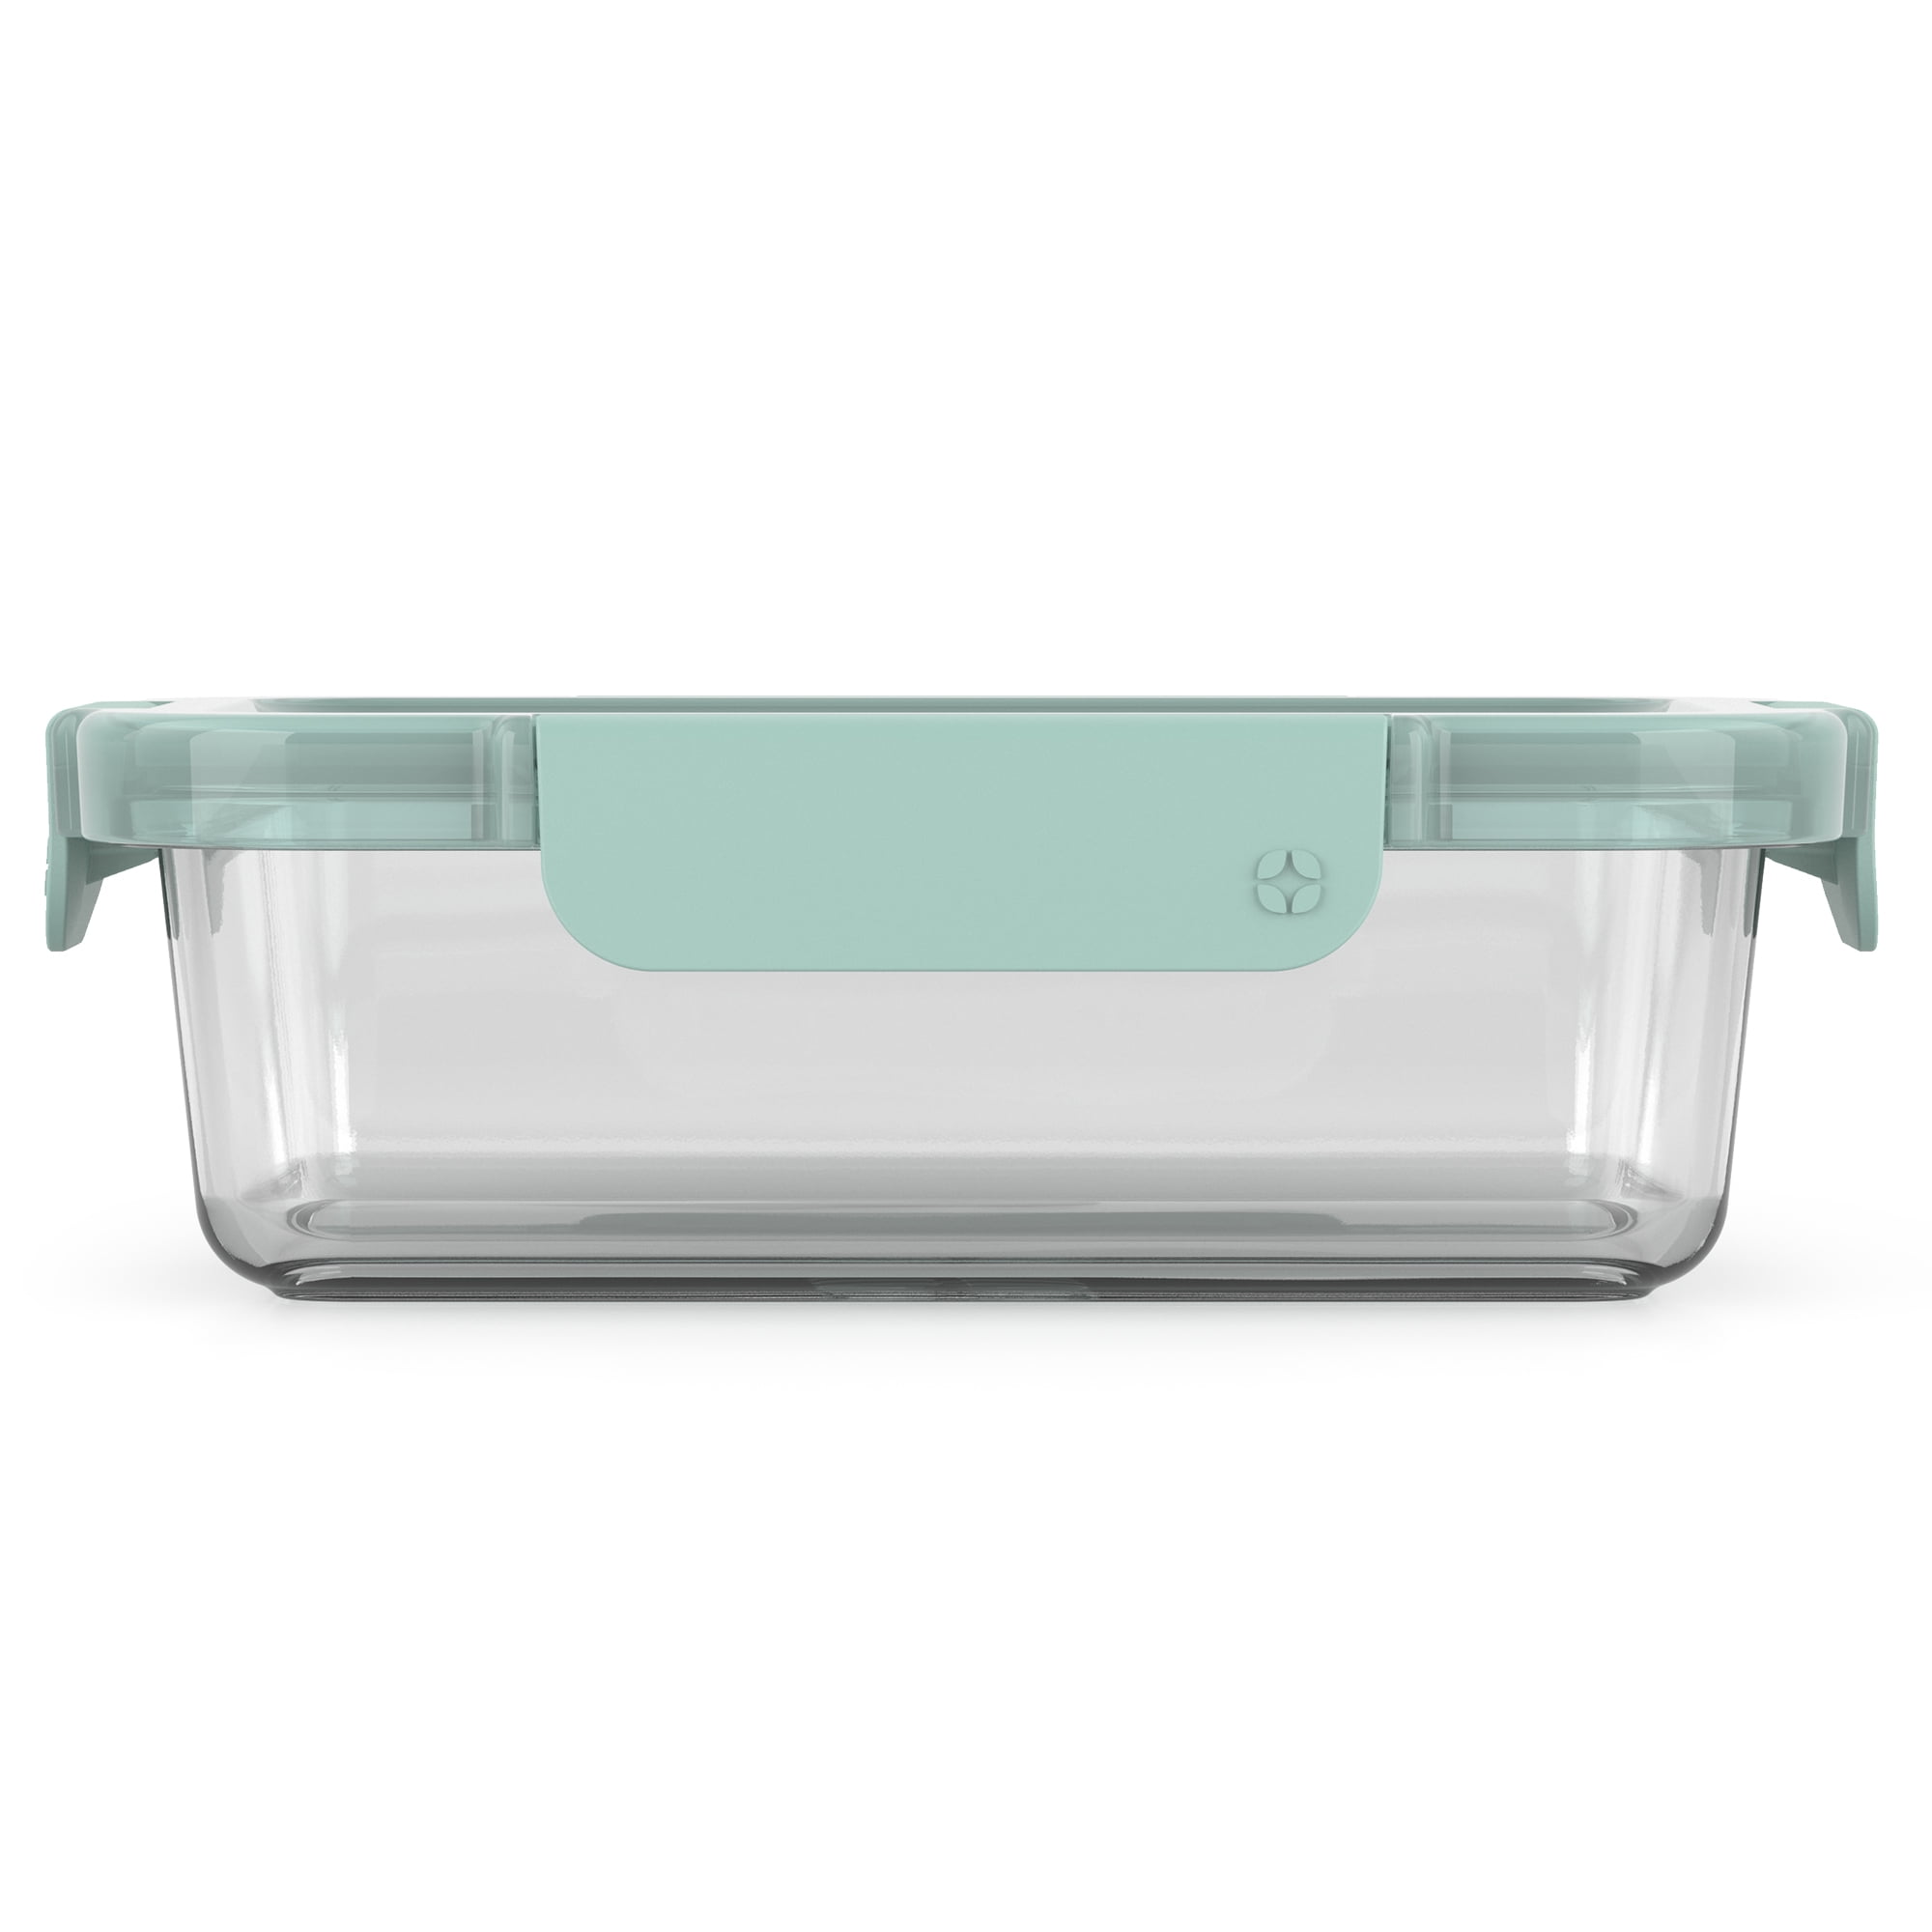 Duraglass™ 3.4 Cup Food Storage Container Replacement Lid- Mint